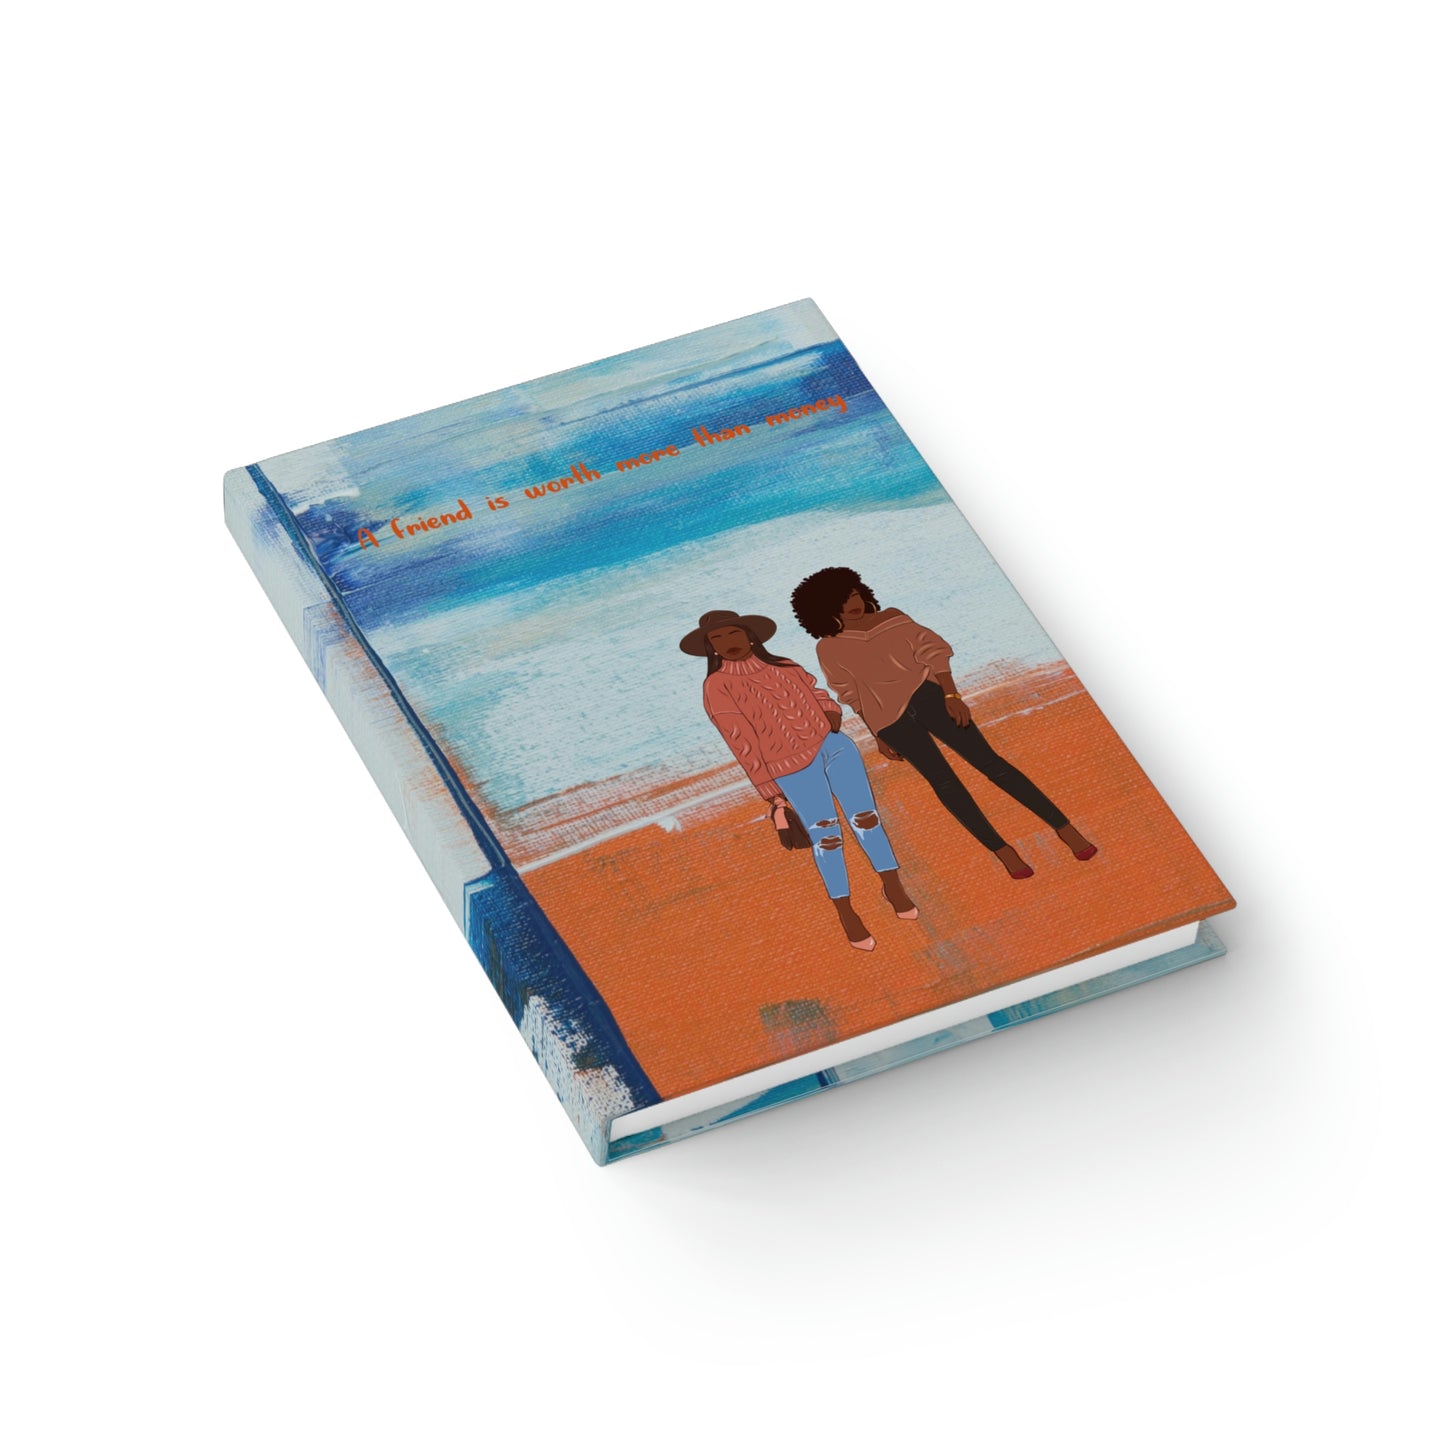 A Friend Is Worth More Than Money (Hardcover) Journal - Ruled Line